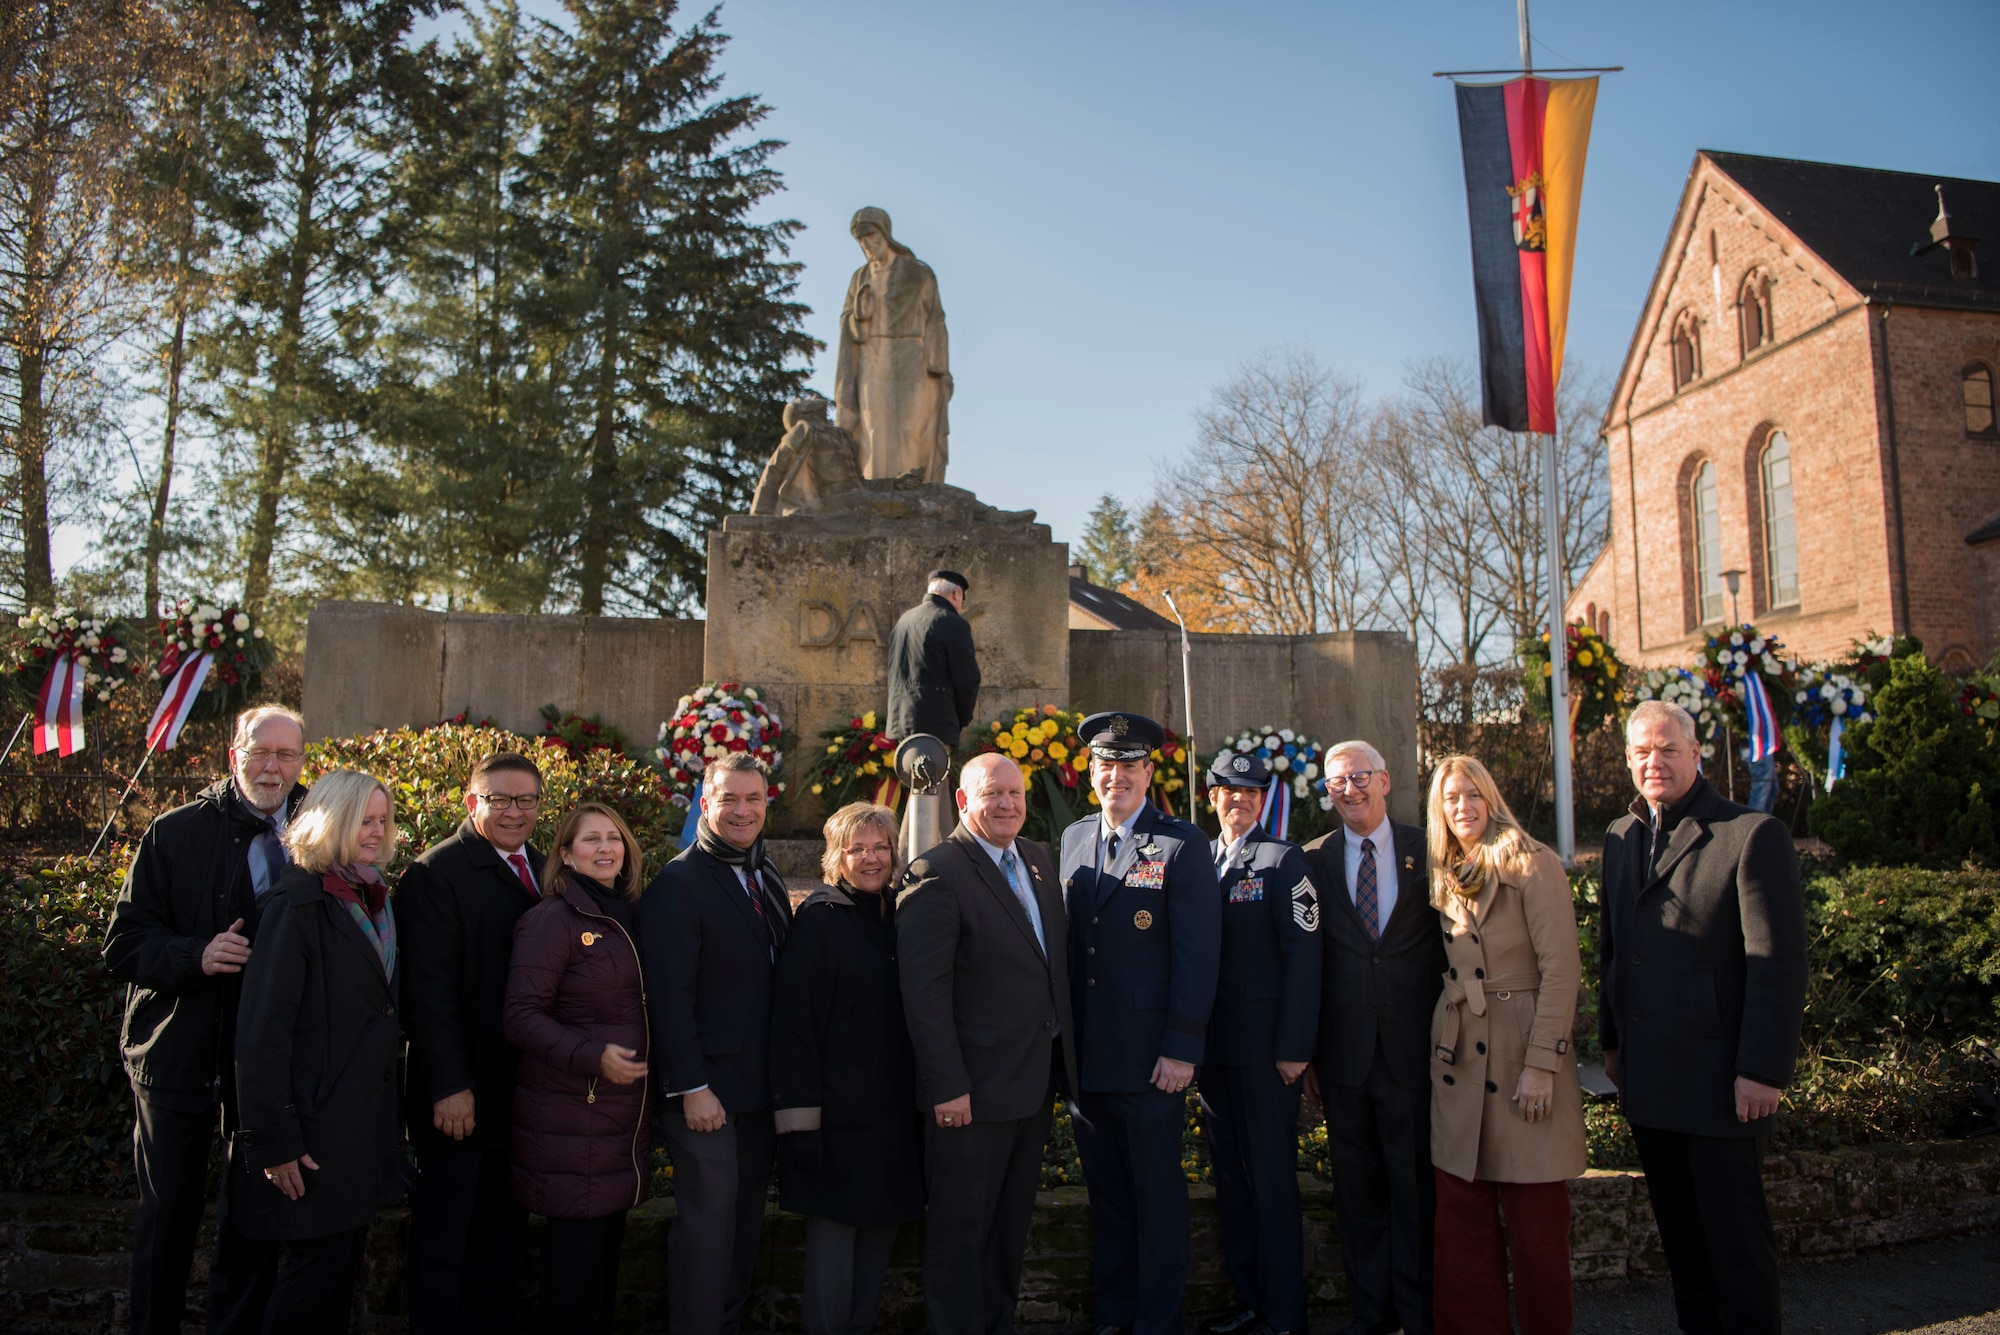 U.S. Air Force Brig. Gen. Mark R. August, 86th Airlift Wing commander, poses with Ralf Hechler, Ramstein-Miesenbach mayor, and other representatives who participated in Germany’s National Day of Mourning in Ramstein-Miesenbach, Nov. 18, 2018. The German National Day of Mourning honors all victims of war and persecution, and is the German equivalent of America’s Memorial Day.